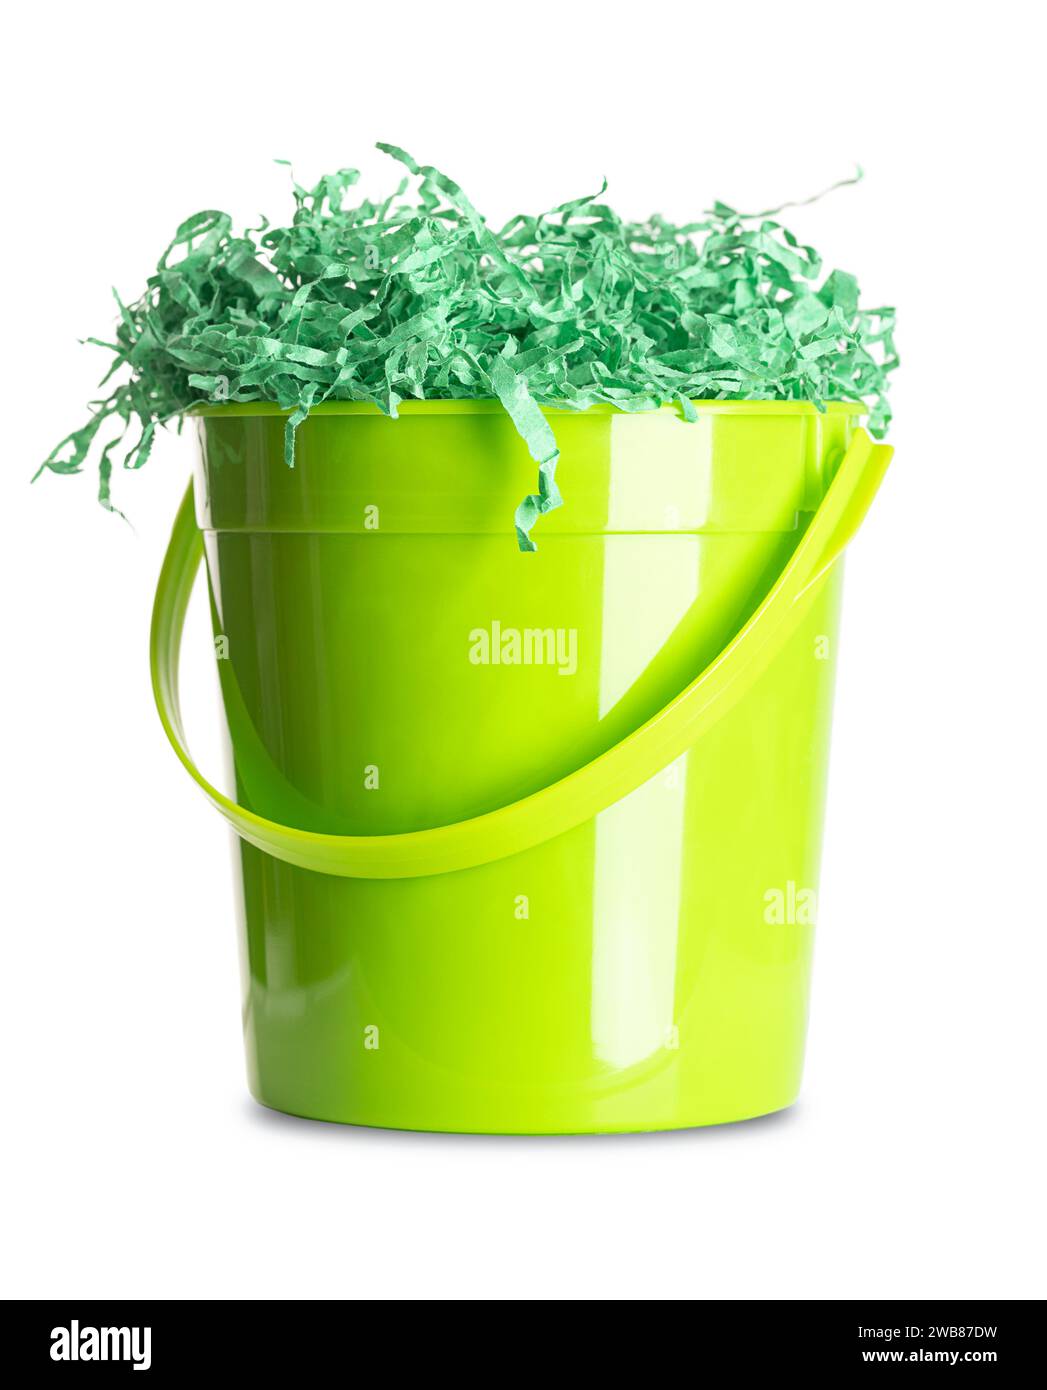 Paper Easter grass in a green plastic bucket. Vibrant colored and crinkled gift basket shred for filling and decoration, stuffed into the bucket. Stock Photo